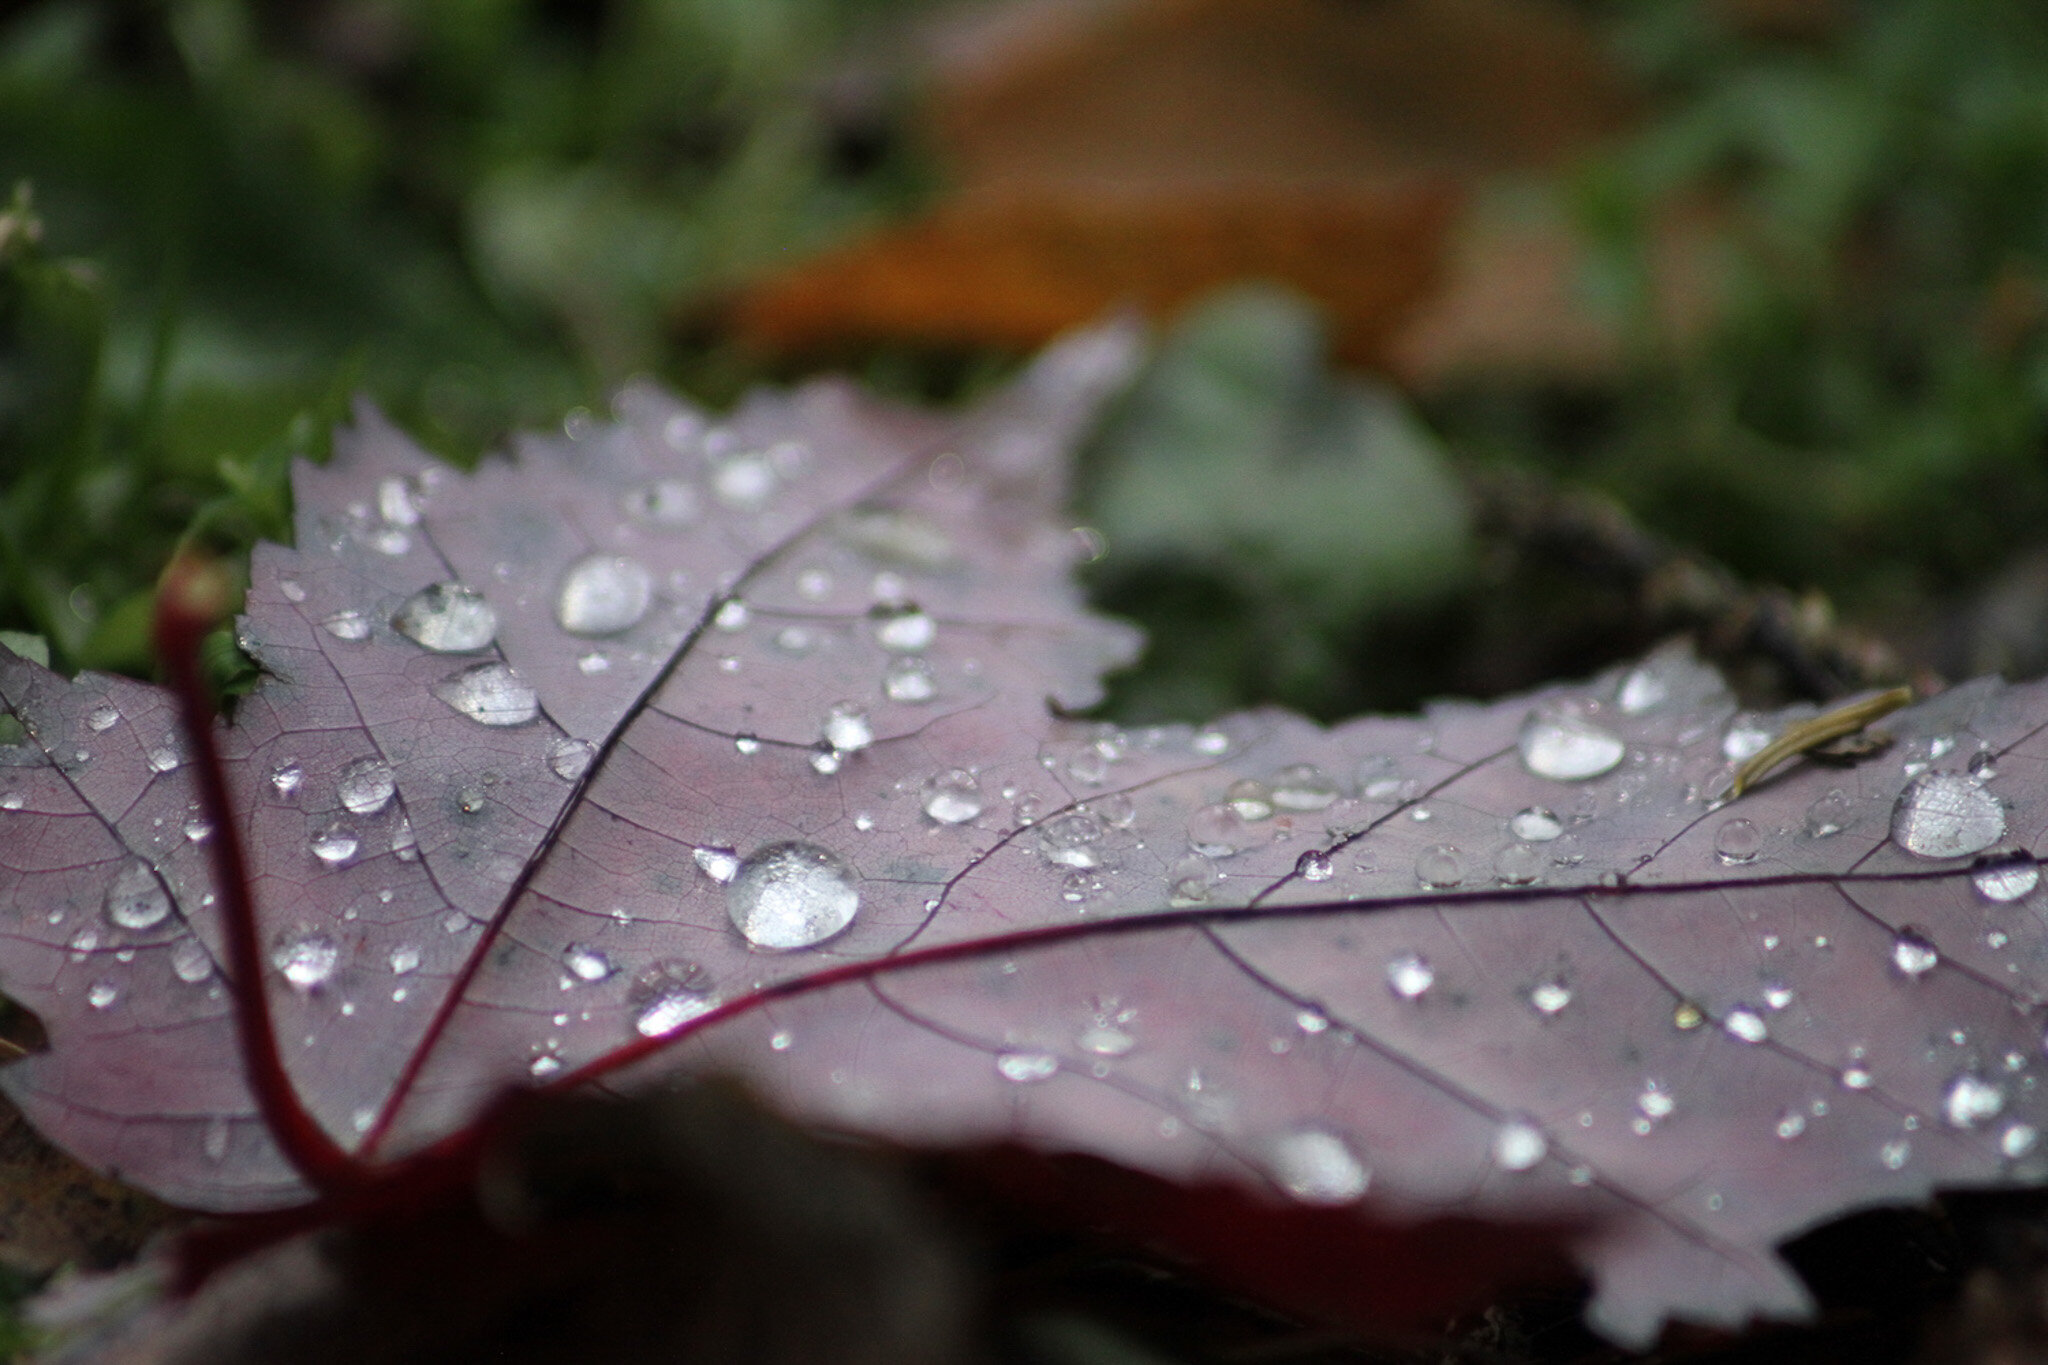  Water droplets on maple leaf 